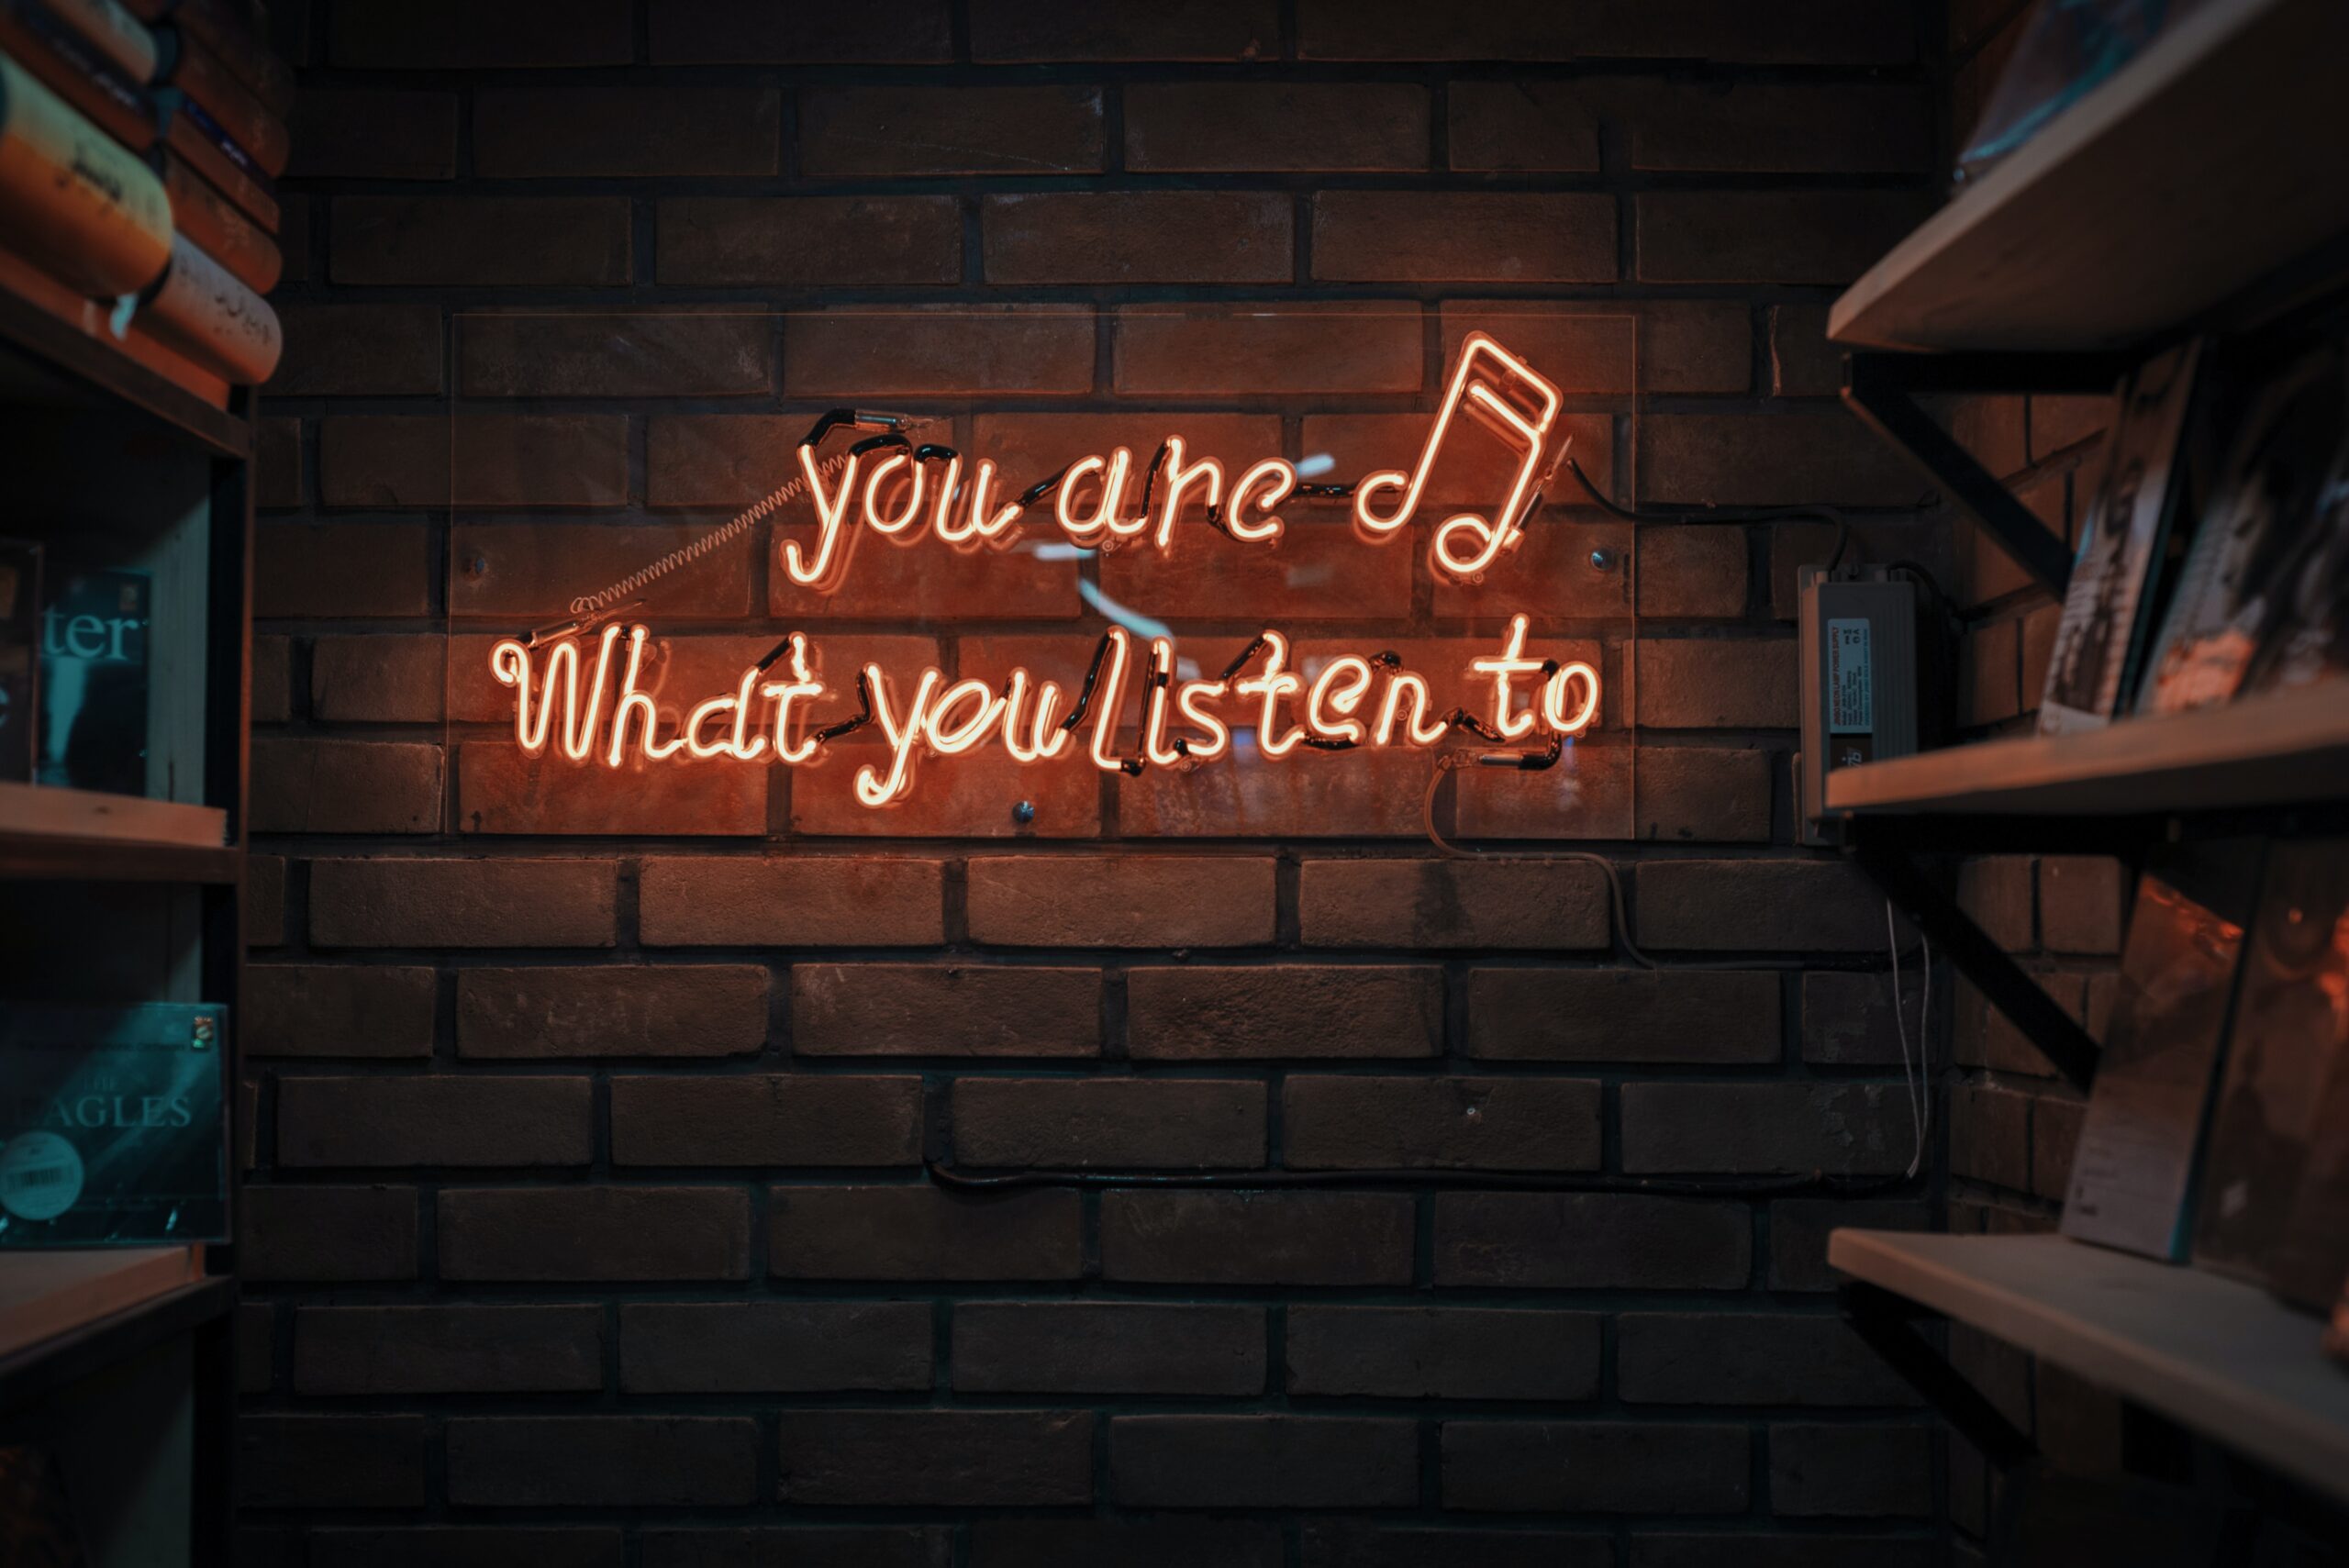 neon sign with music inspirational quote for the manzanilla sophia blog